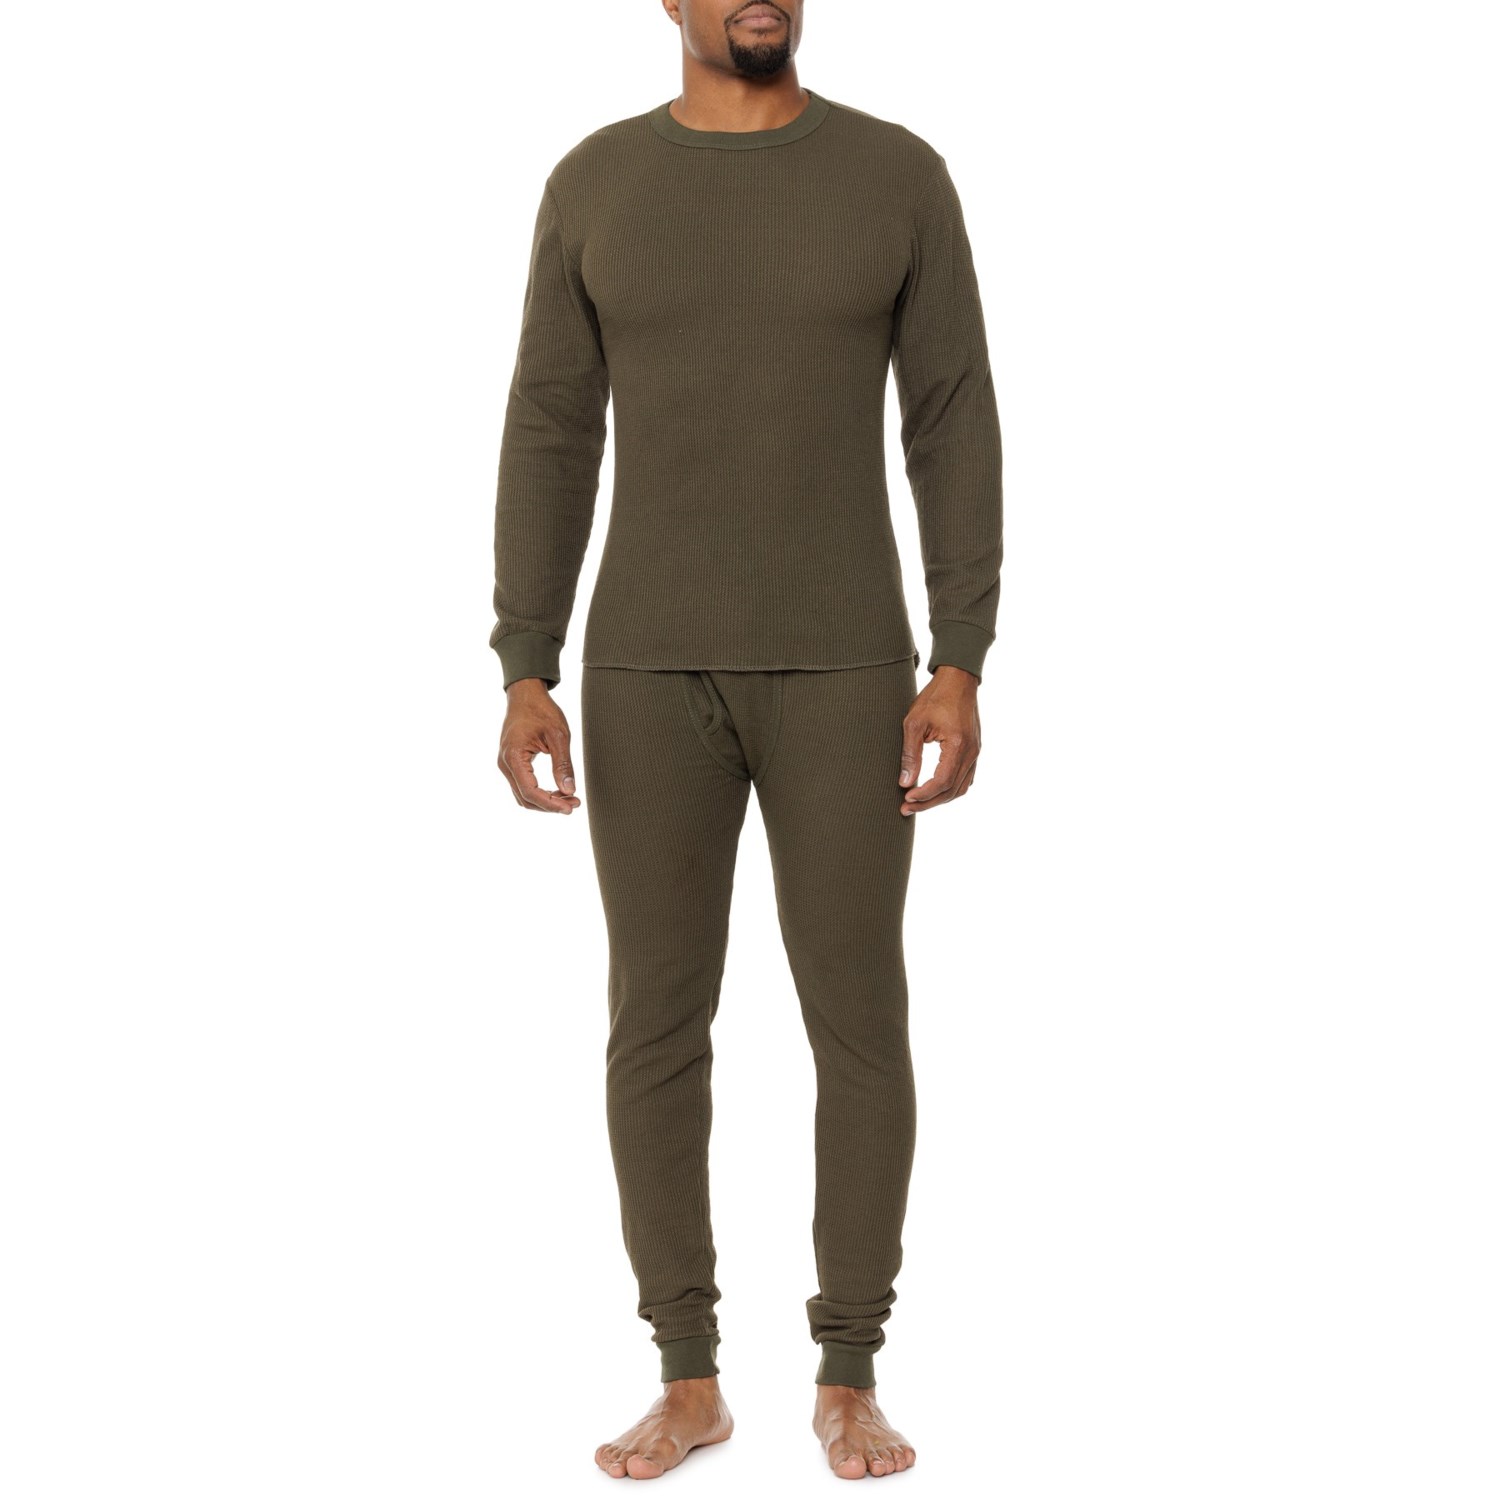 Smith's Workwear Thermal Long Underwear Set - Long Sleeve - Save 60%